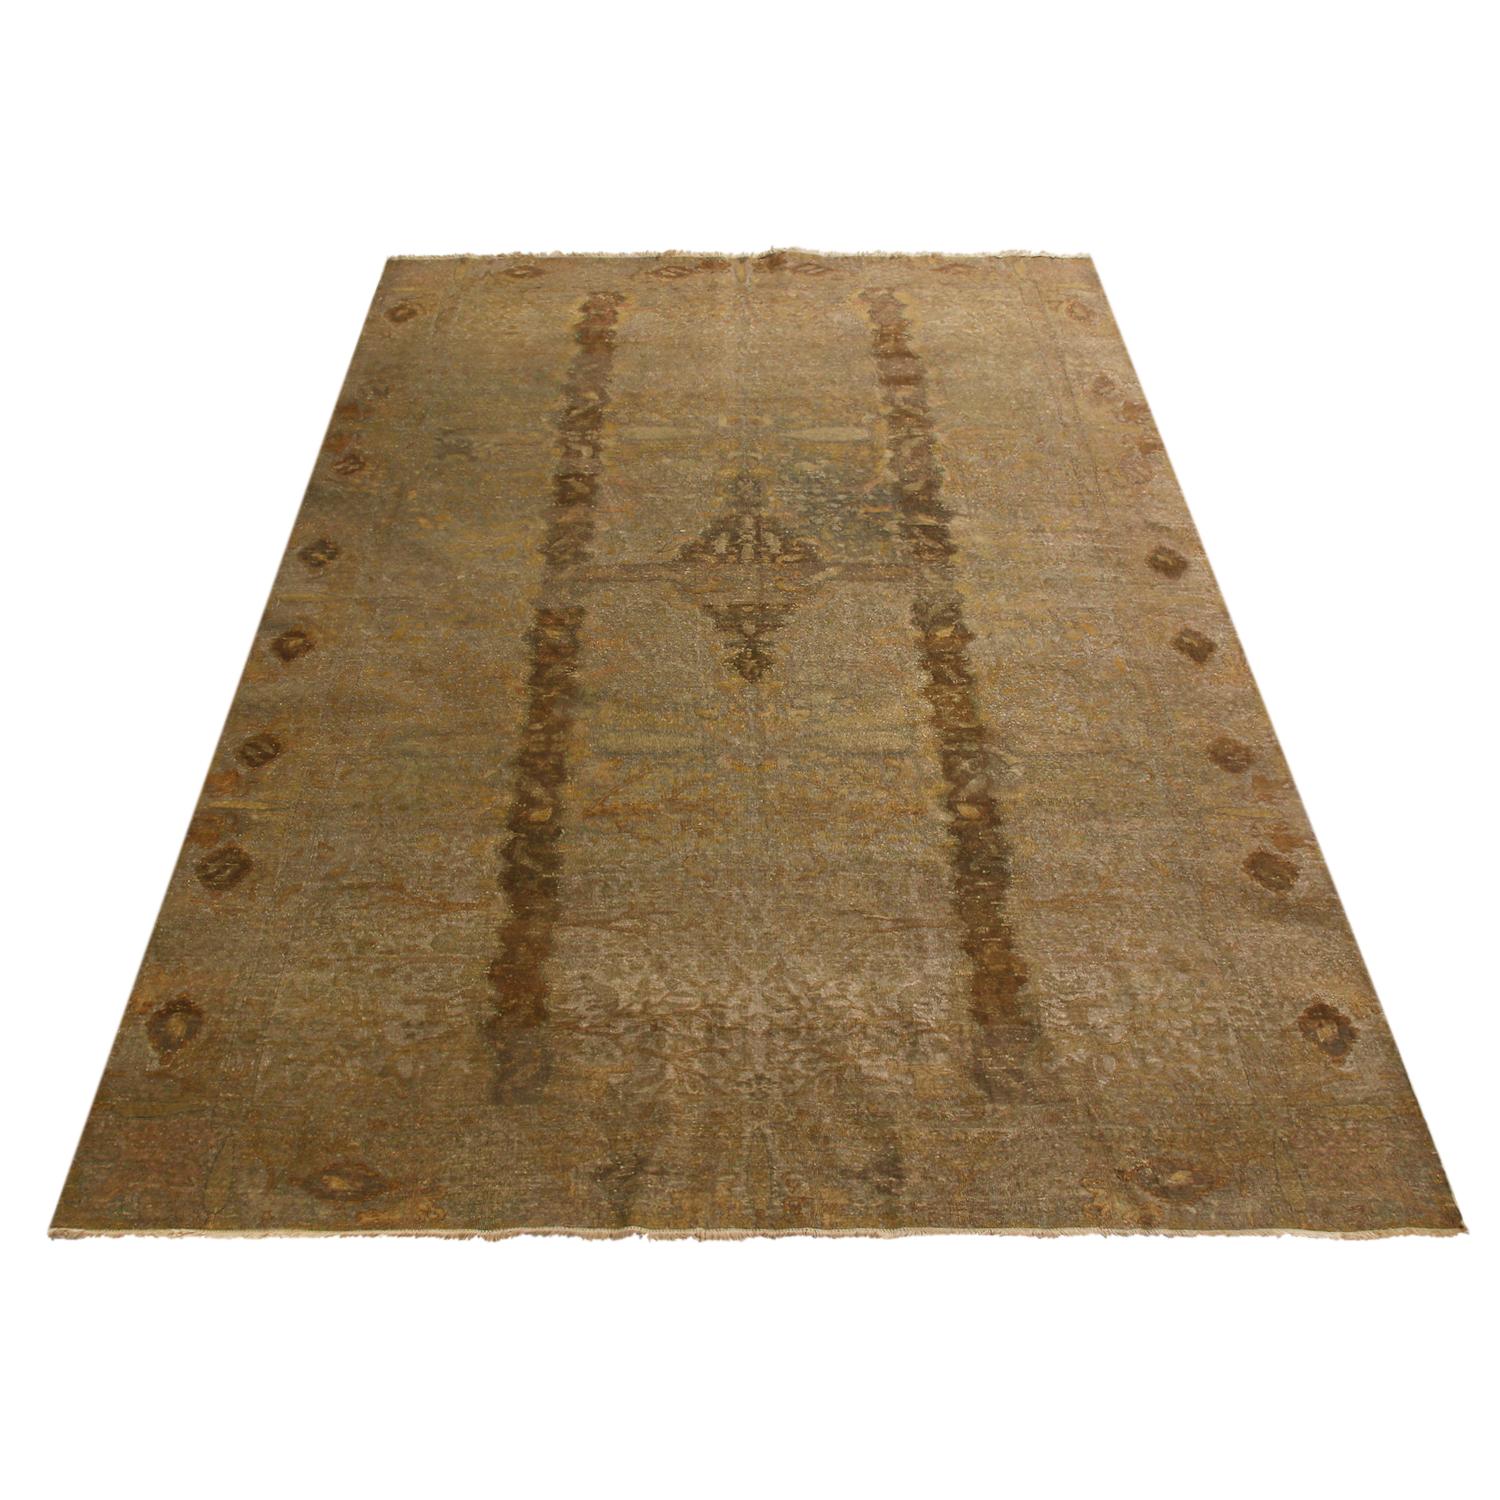 Hand knotted with metallic-thread wool originating from Turkey in 1880, this antique Hereke rug hosts a luminous, light-catching body with both versatile and lively beige-brown, golden yellow, and frost blue colorways. Enjoying minimal distress on